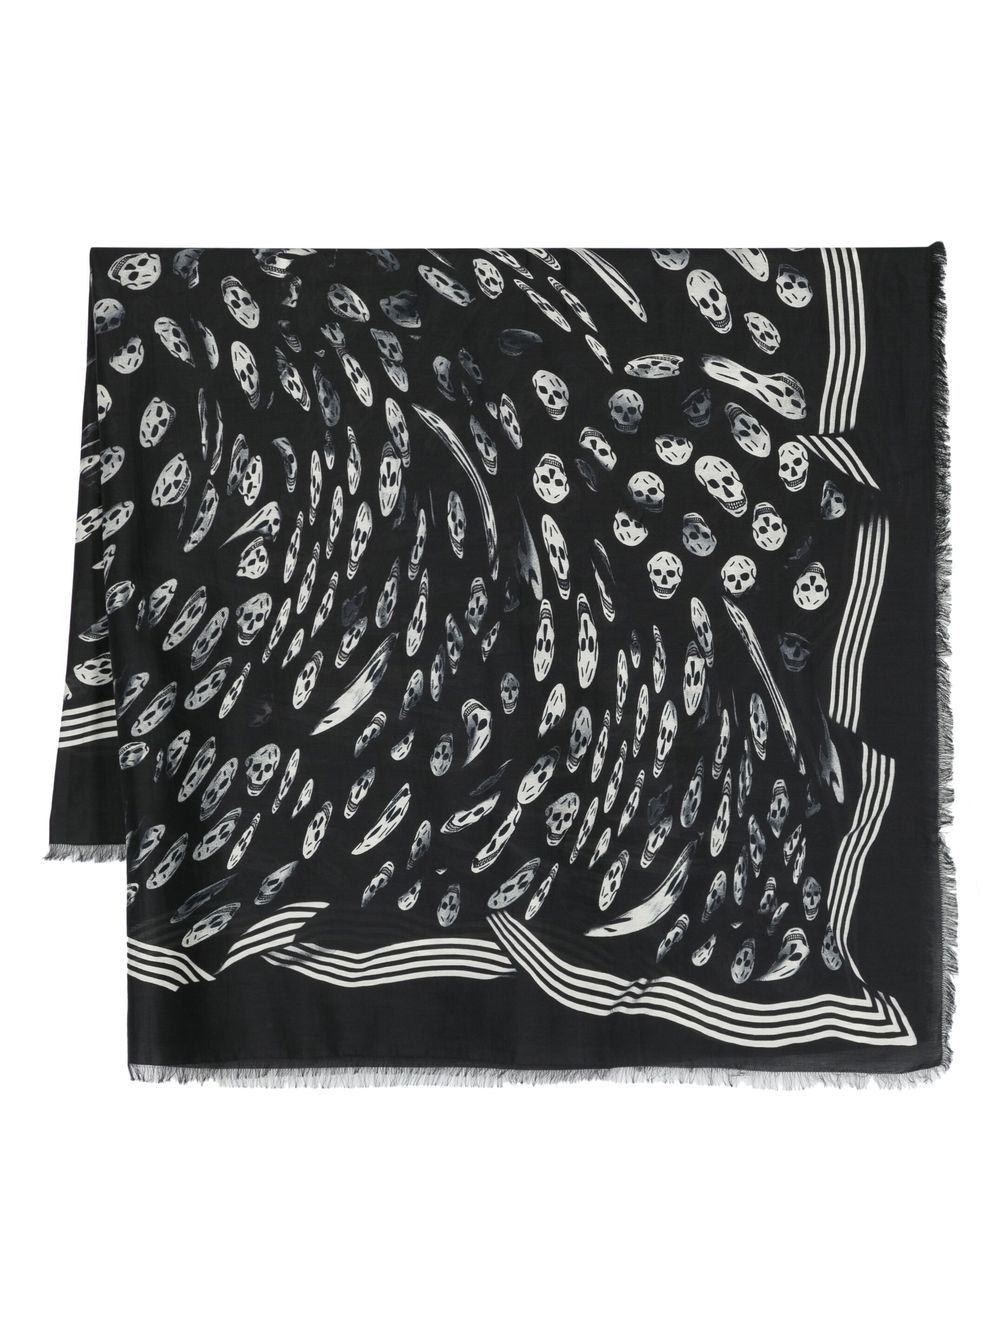 Distorted skull-patterned scarf